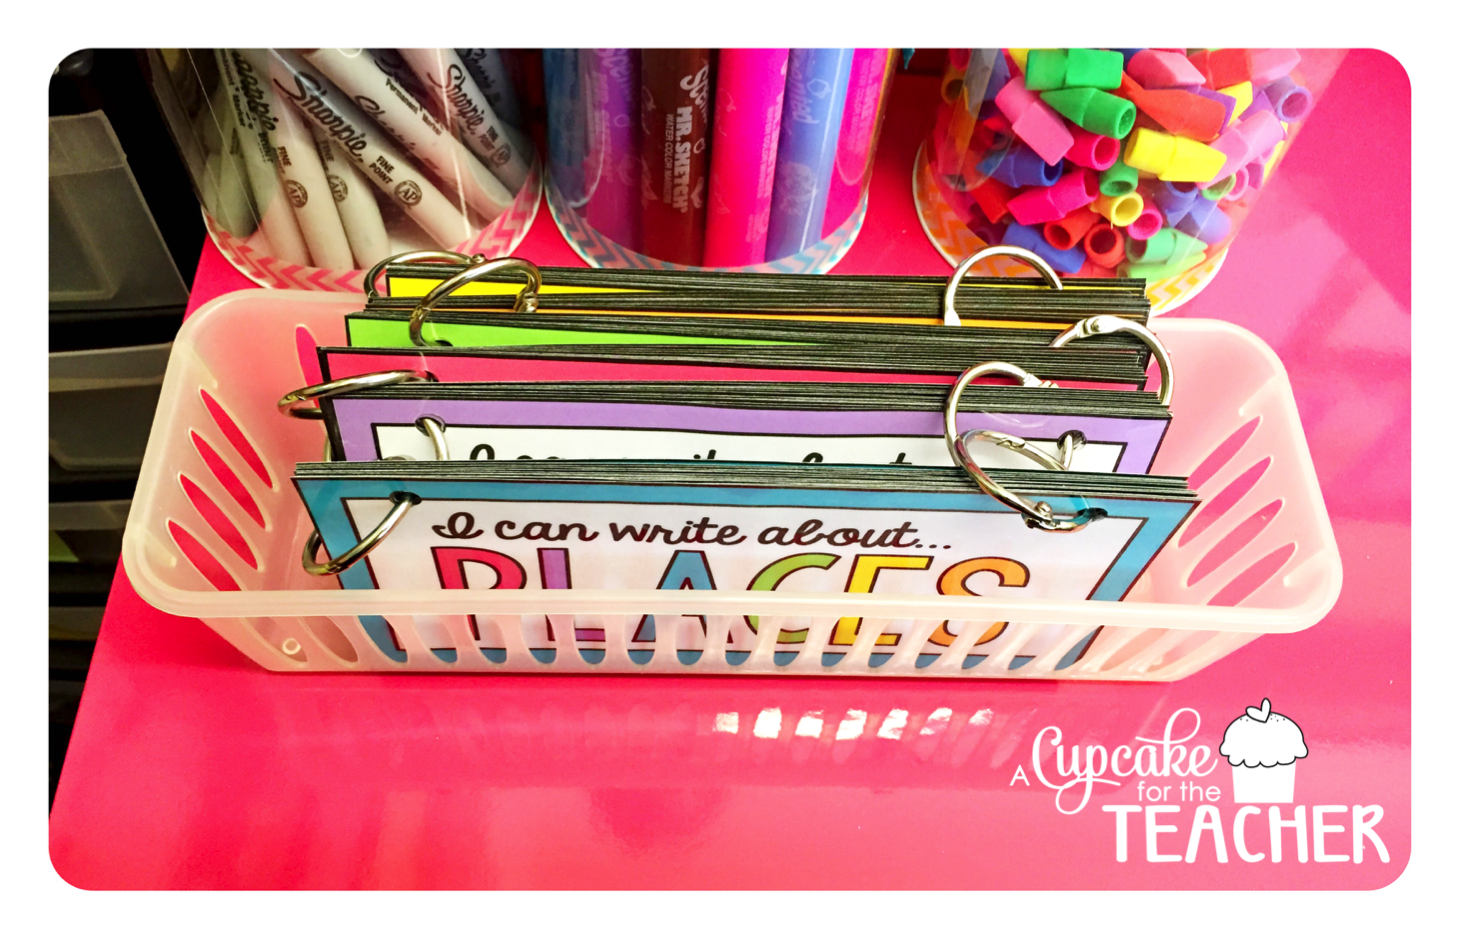 Storage option for writing topic cards - a great solution for writing centers!